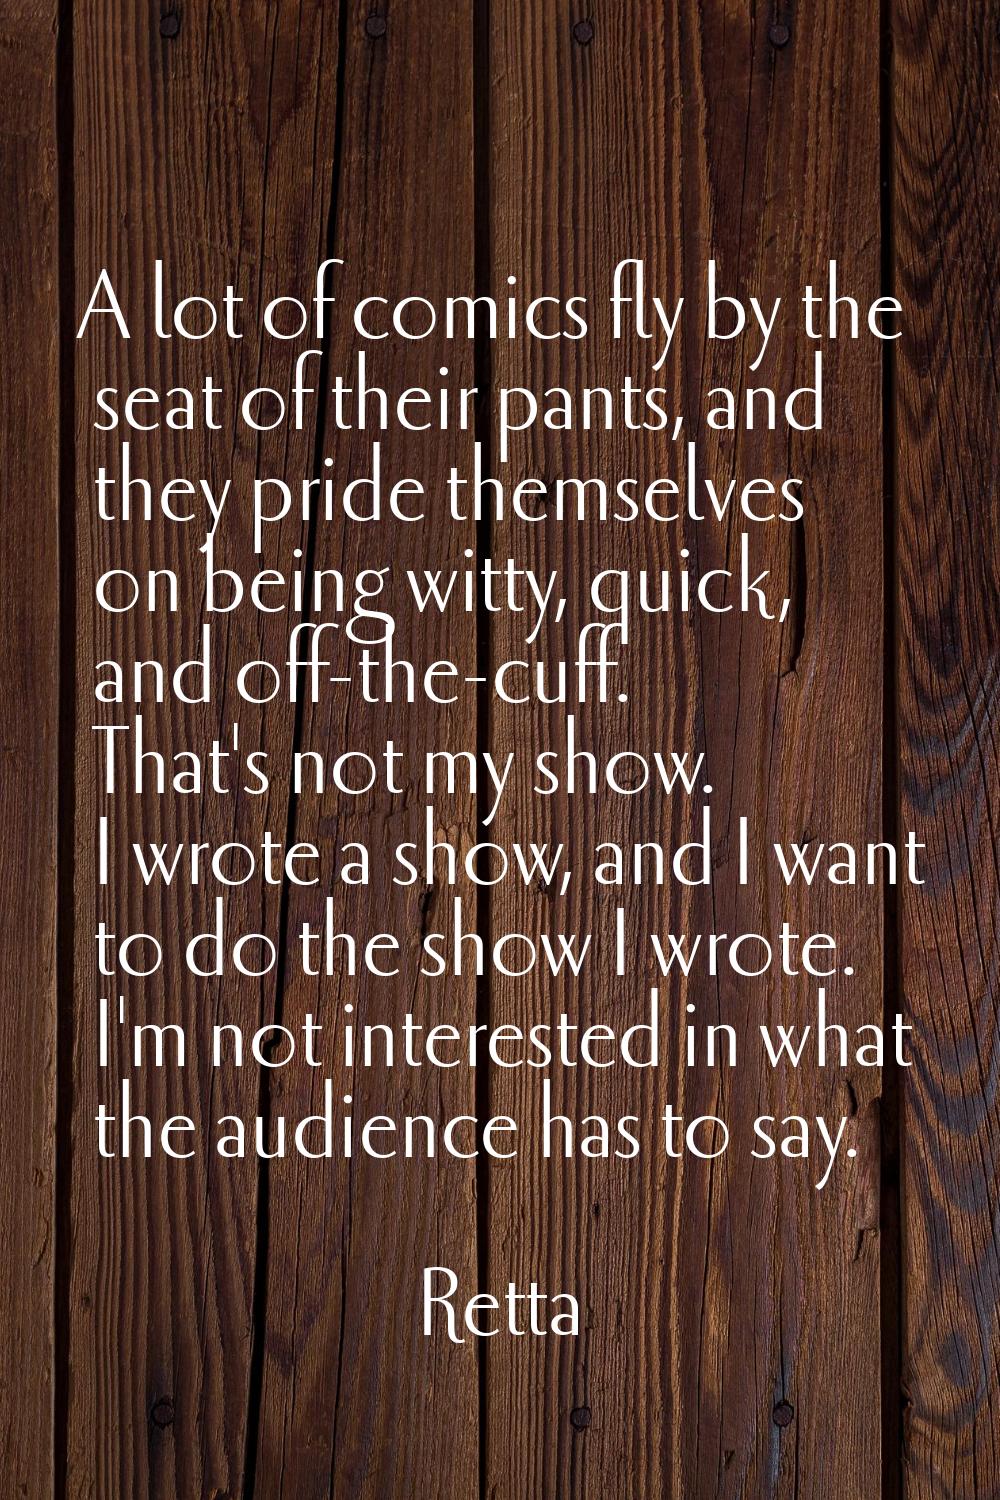 A lot of comics fly by the seat of their pants, and they pride themselves on being witty, quick, an